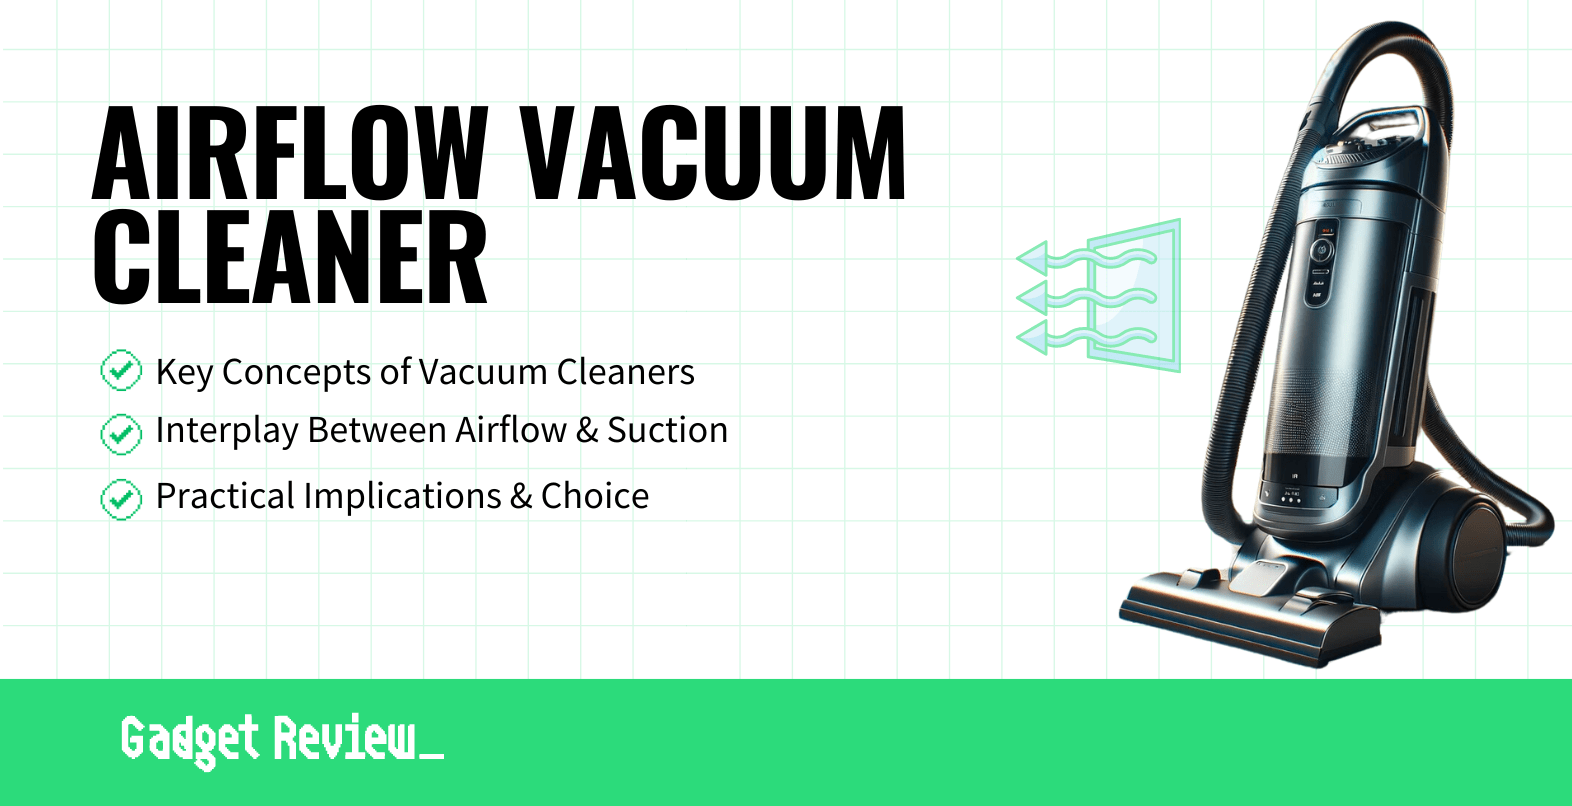 Suction vs Airflow in Vacuum Cleaners